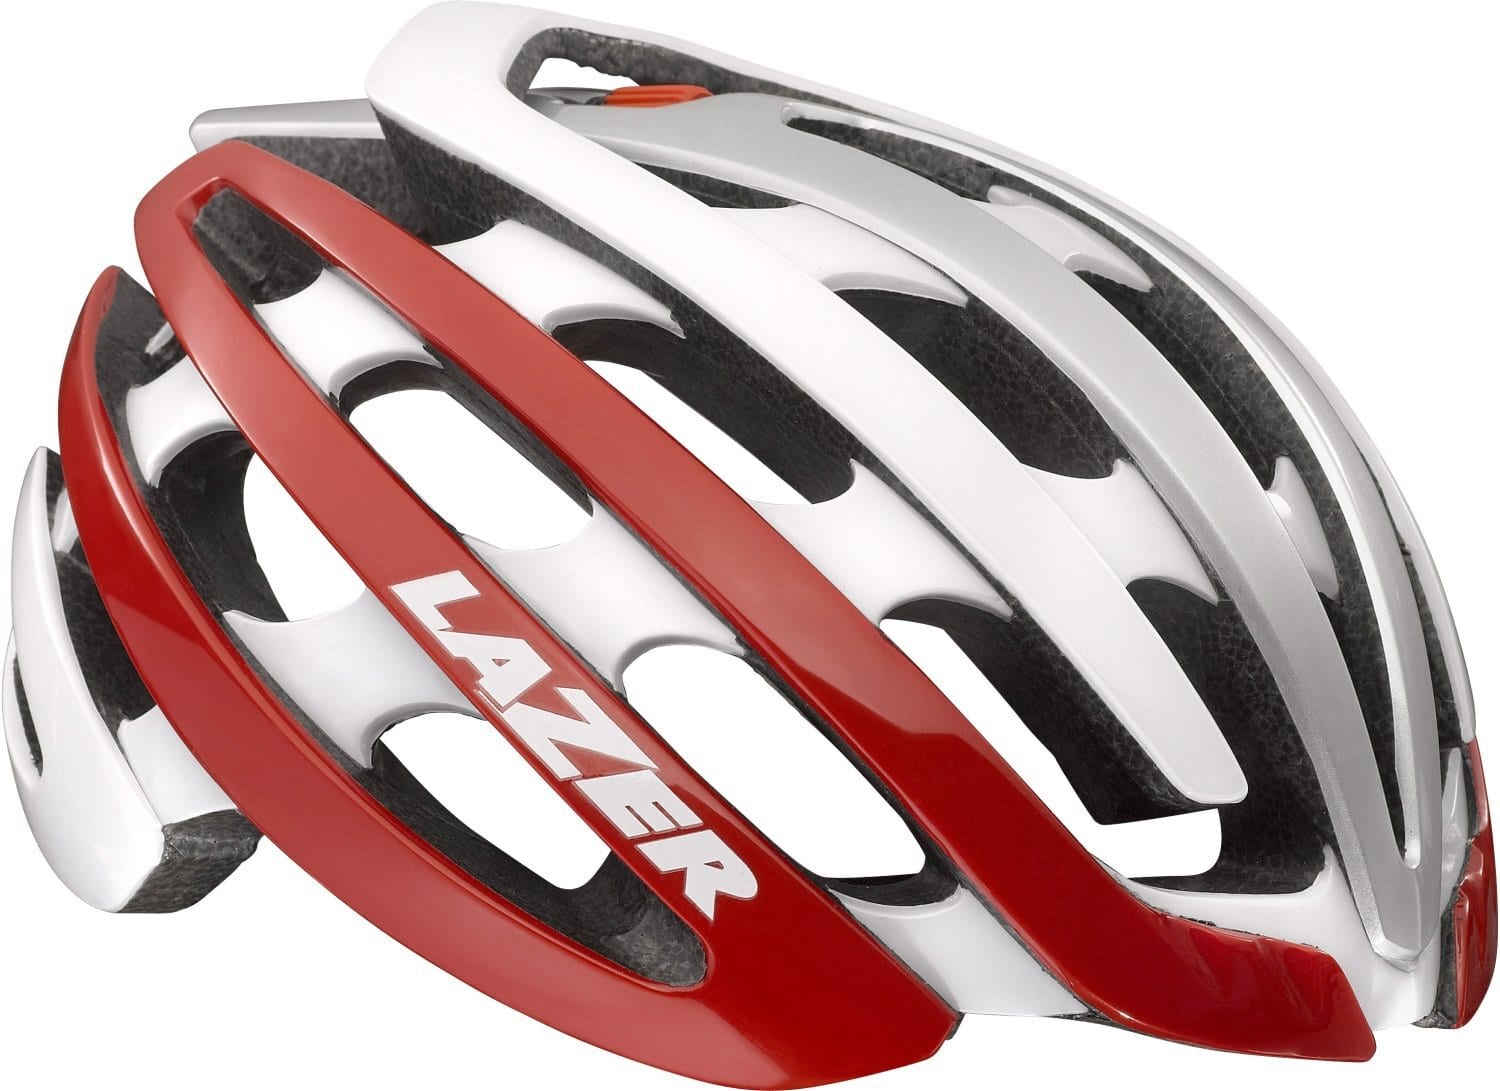 The Best and Safest Cycling Helmets in 2022 - Scientifically Tested 3